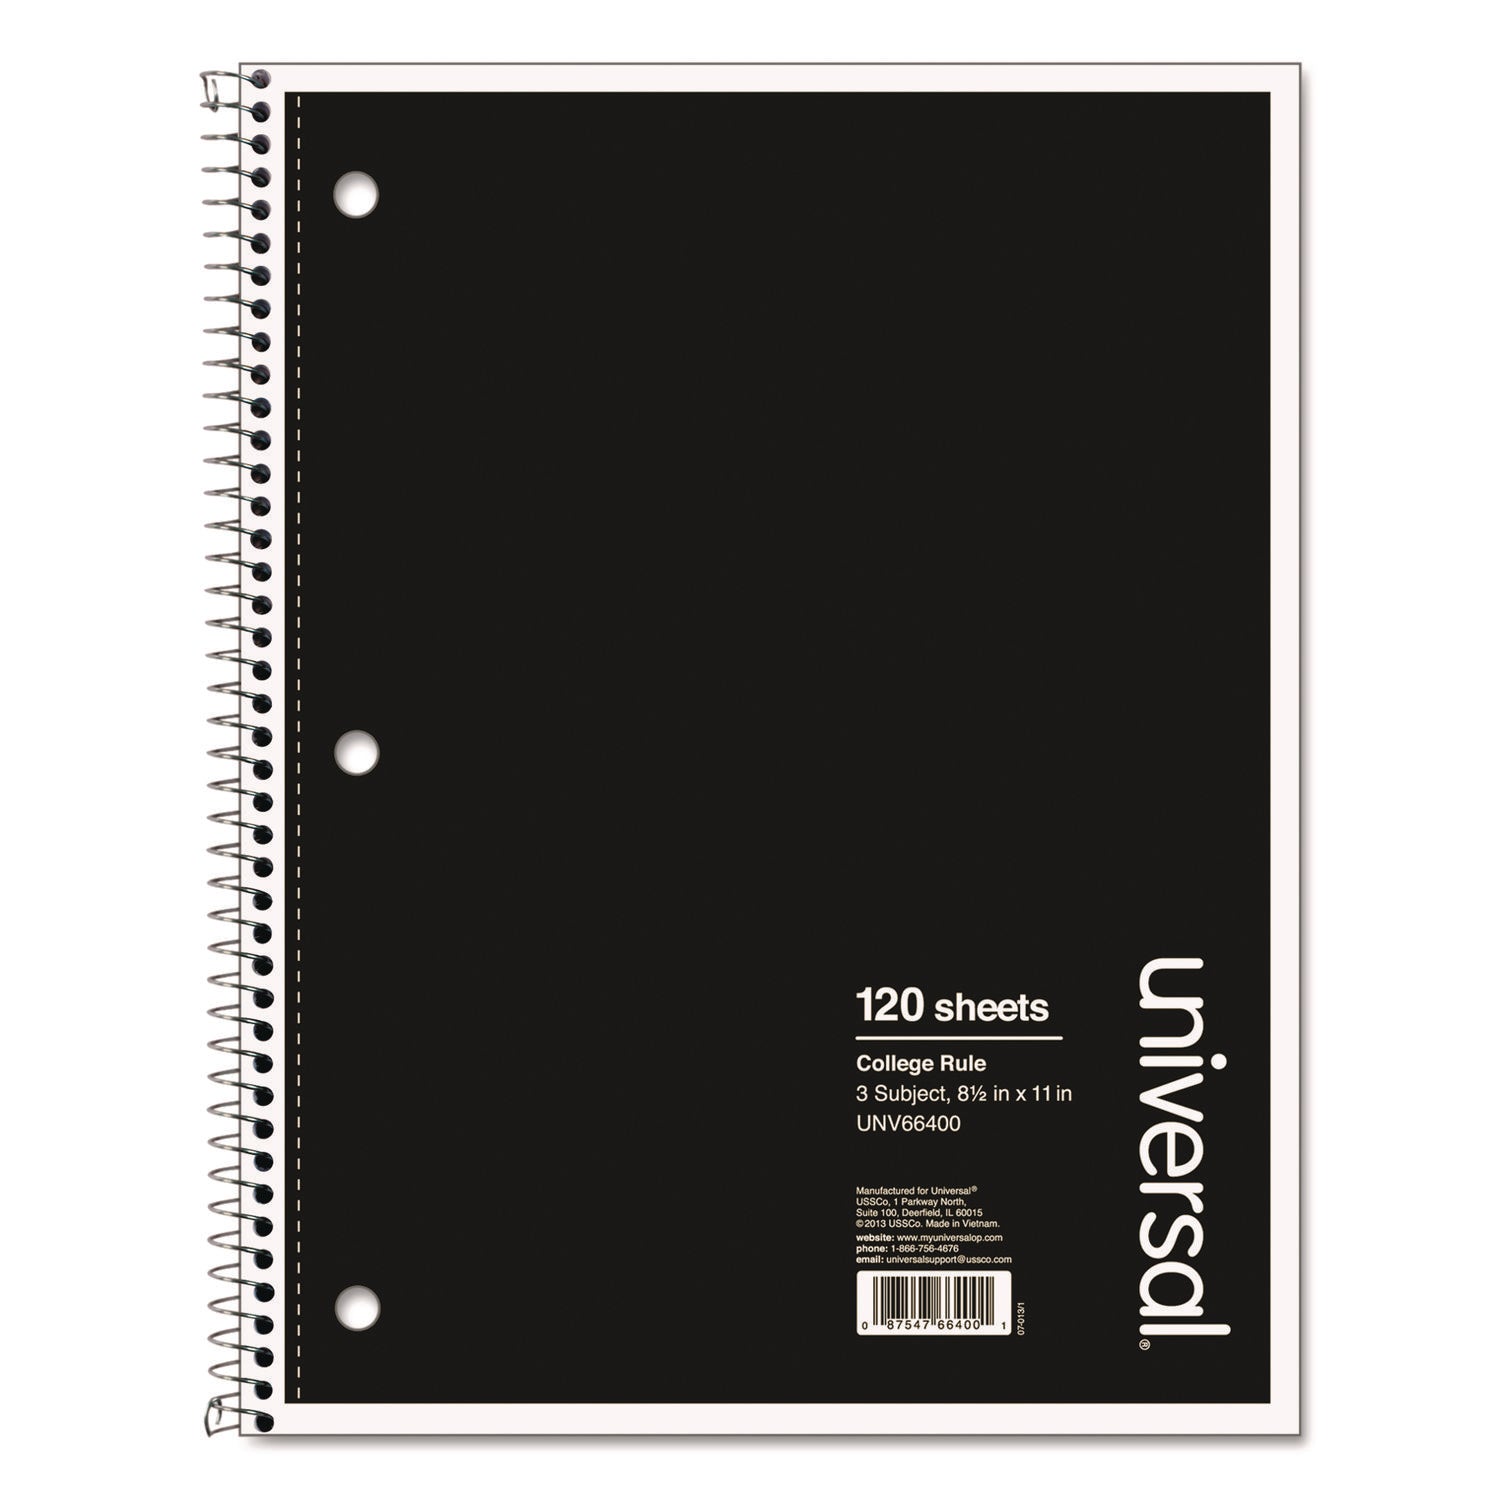 Wirebound Notebook, 3-Subject, Medium/College Rule, Black Cover, (120) 11 x 8.5 Sheets - 2